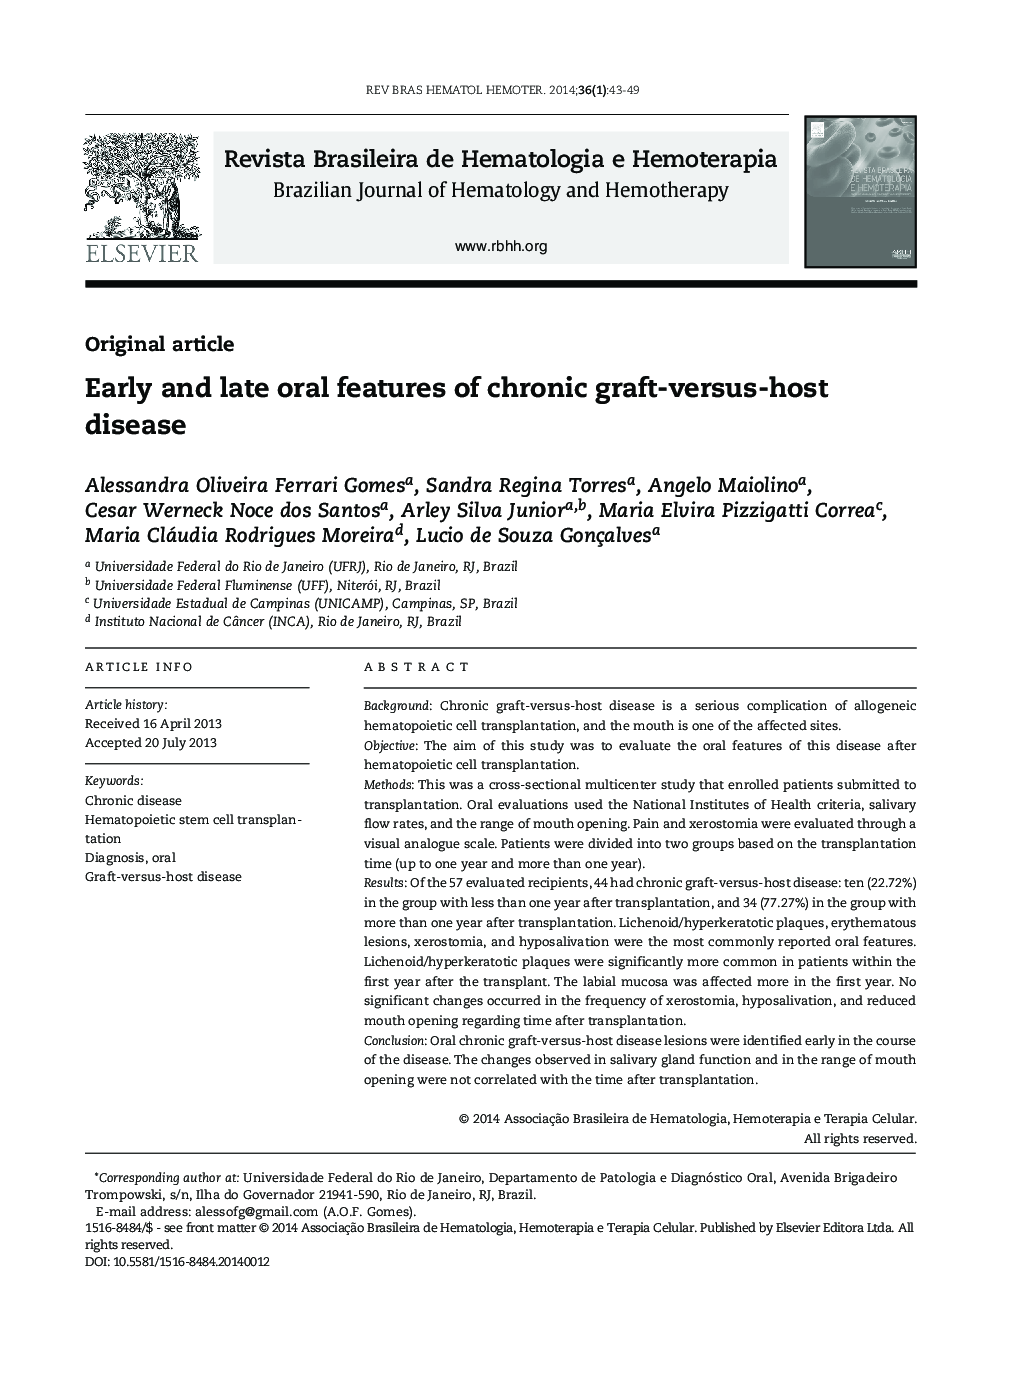 Early and late oral features of chronic graft-versus-host disease